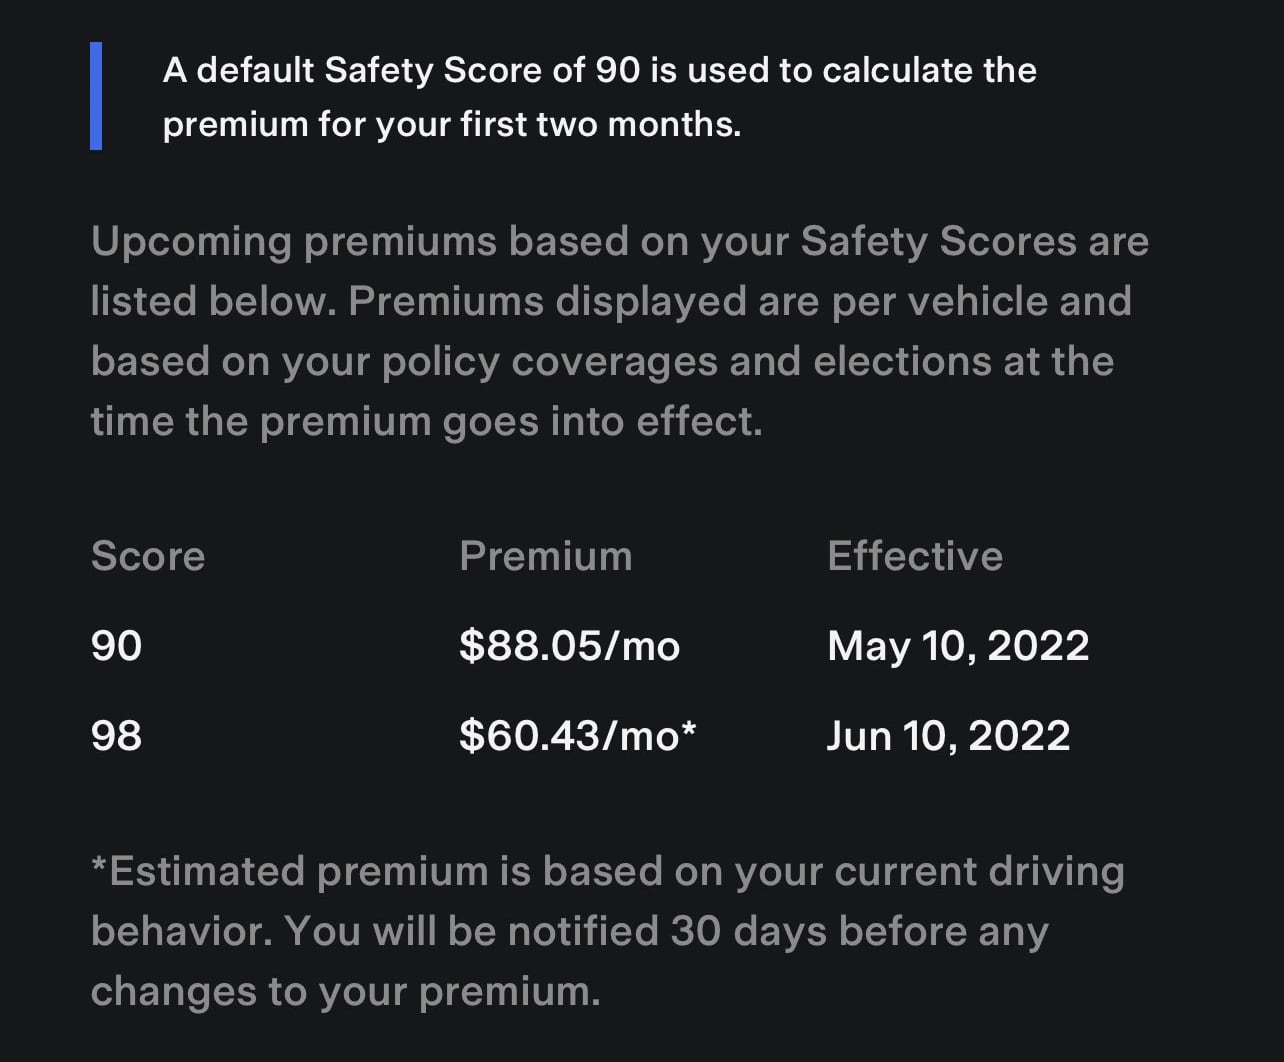 Your Safety Score can have a large impact on your insurance premium